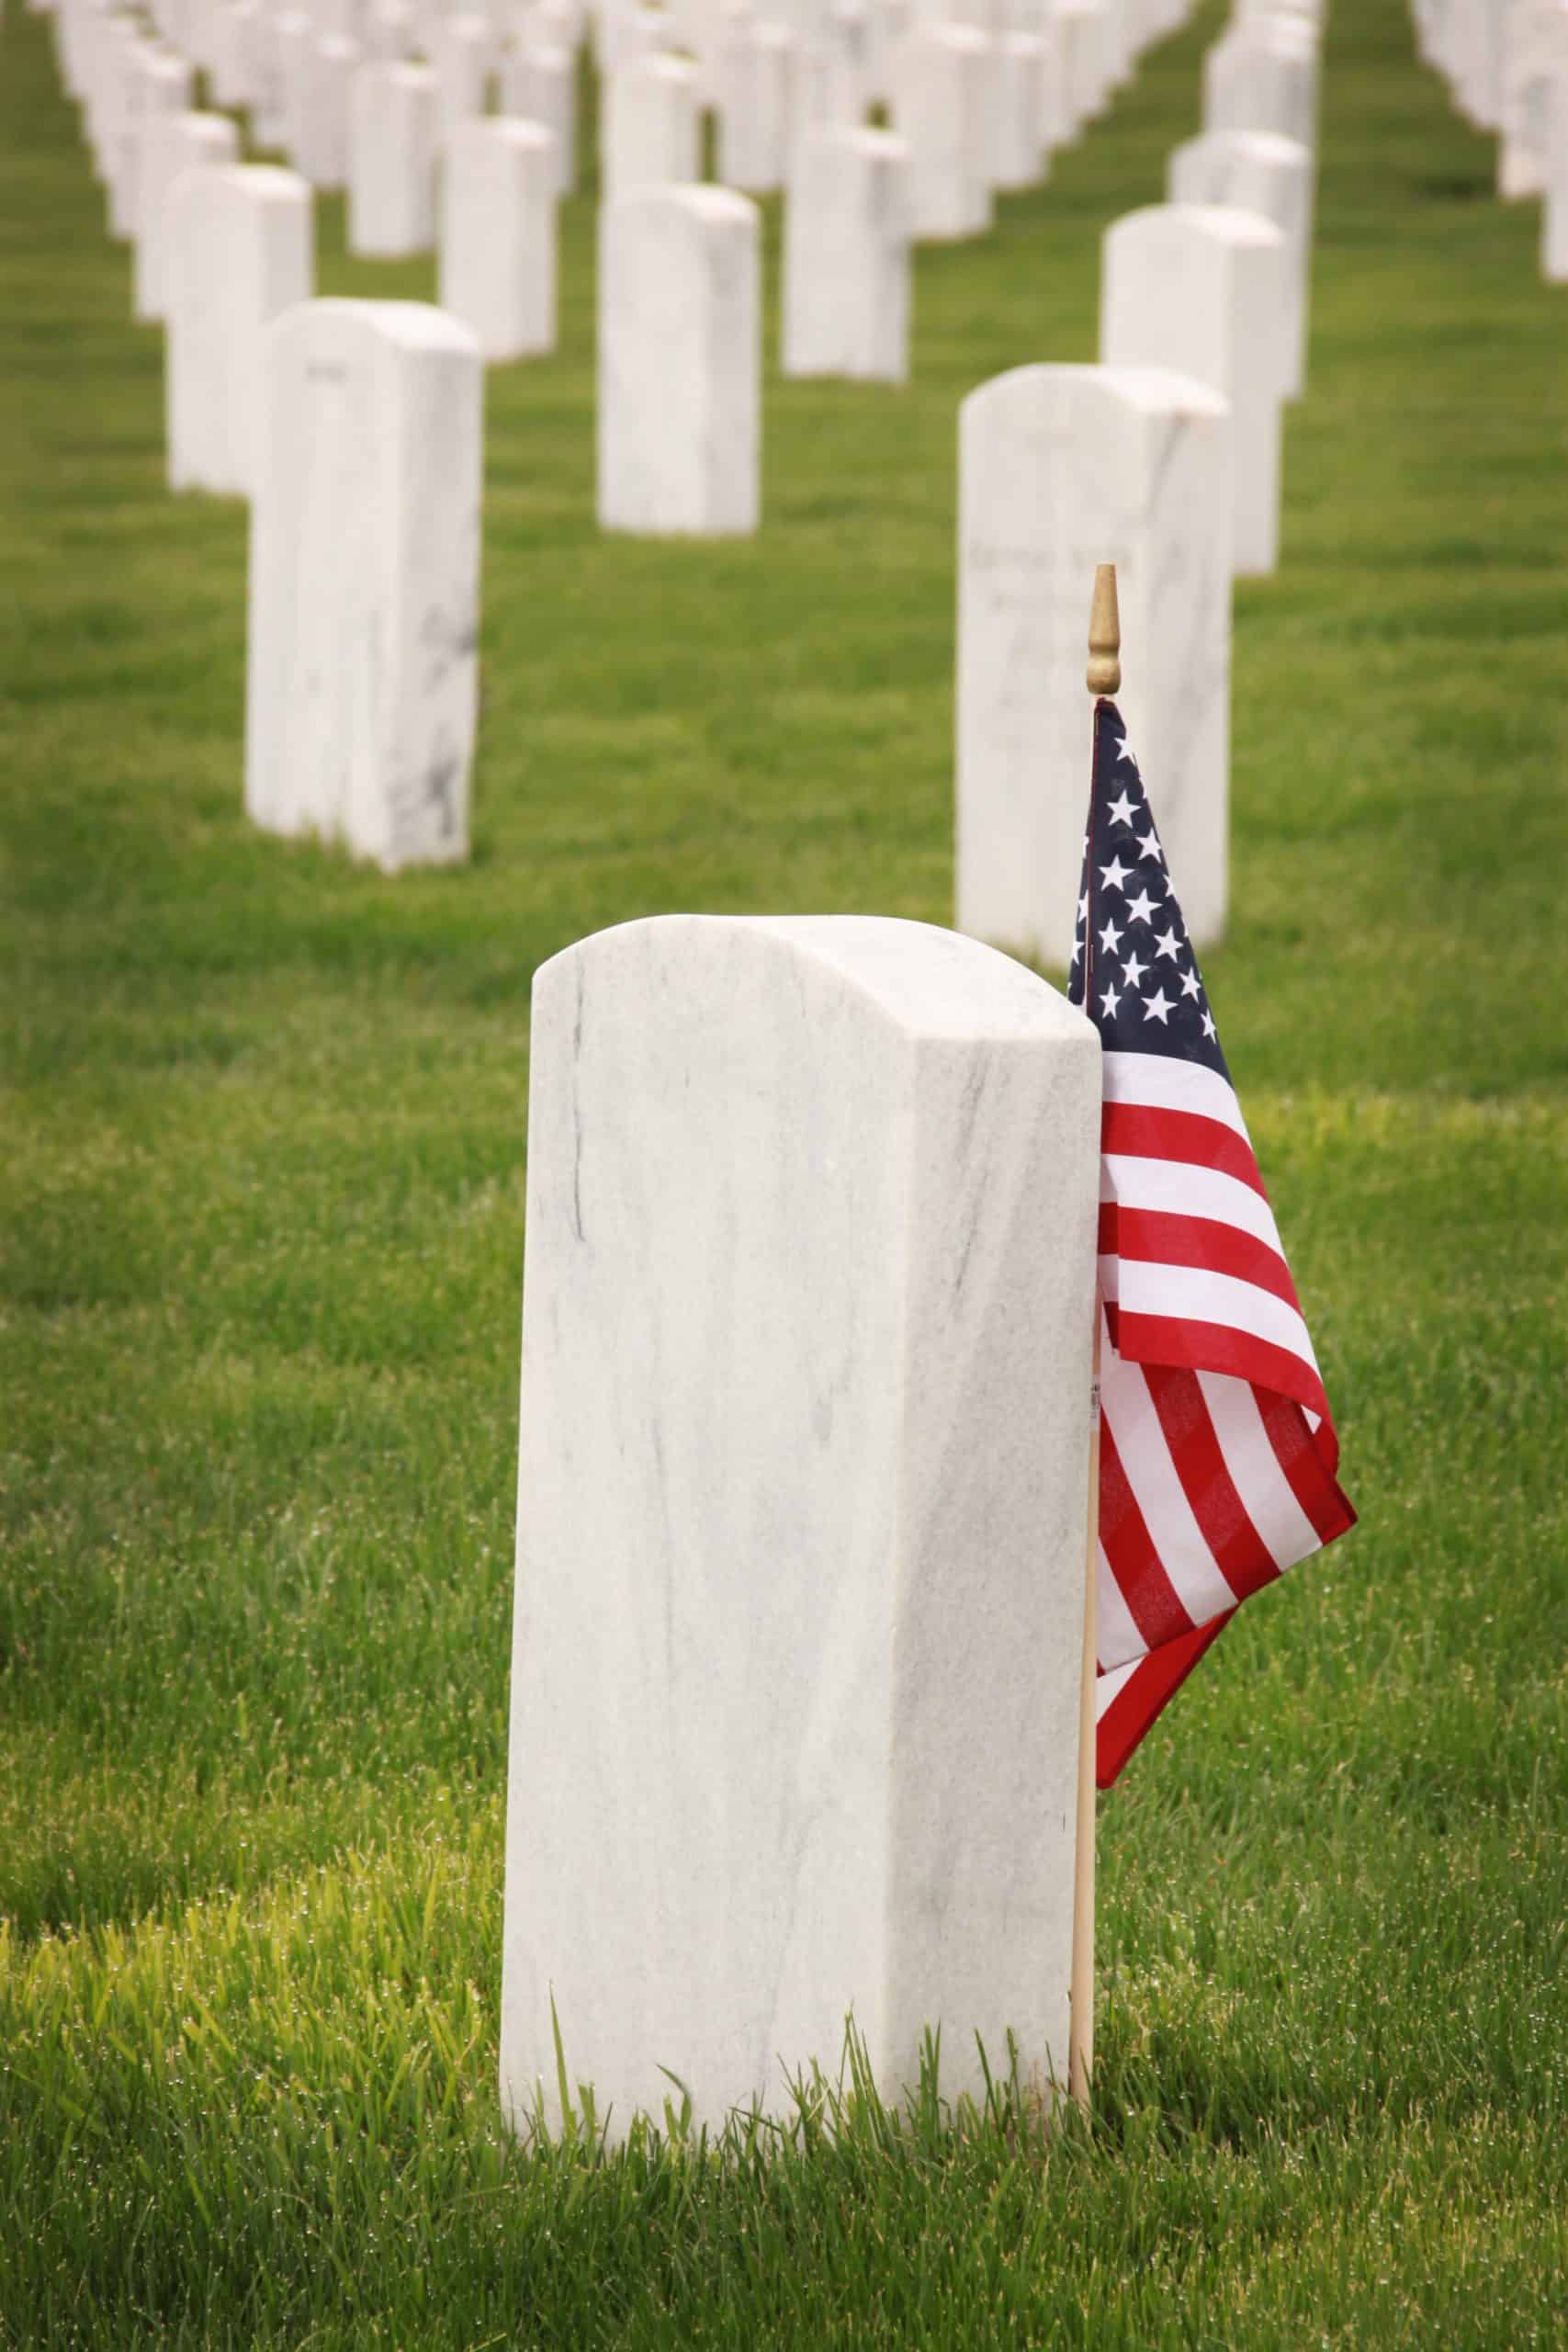 How To Celebrate Memorial Day With Meaning